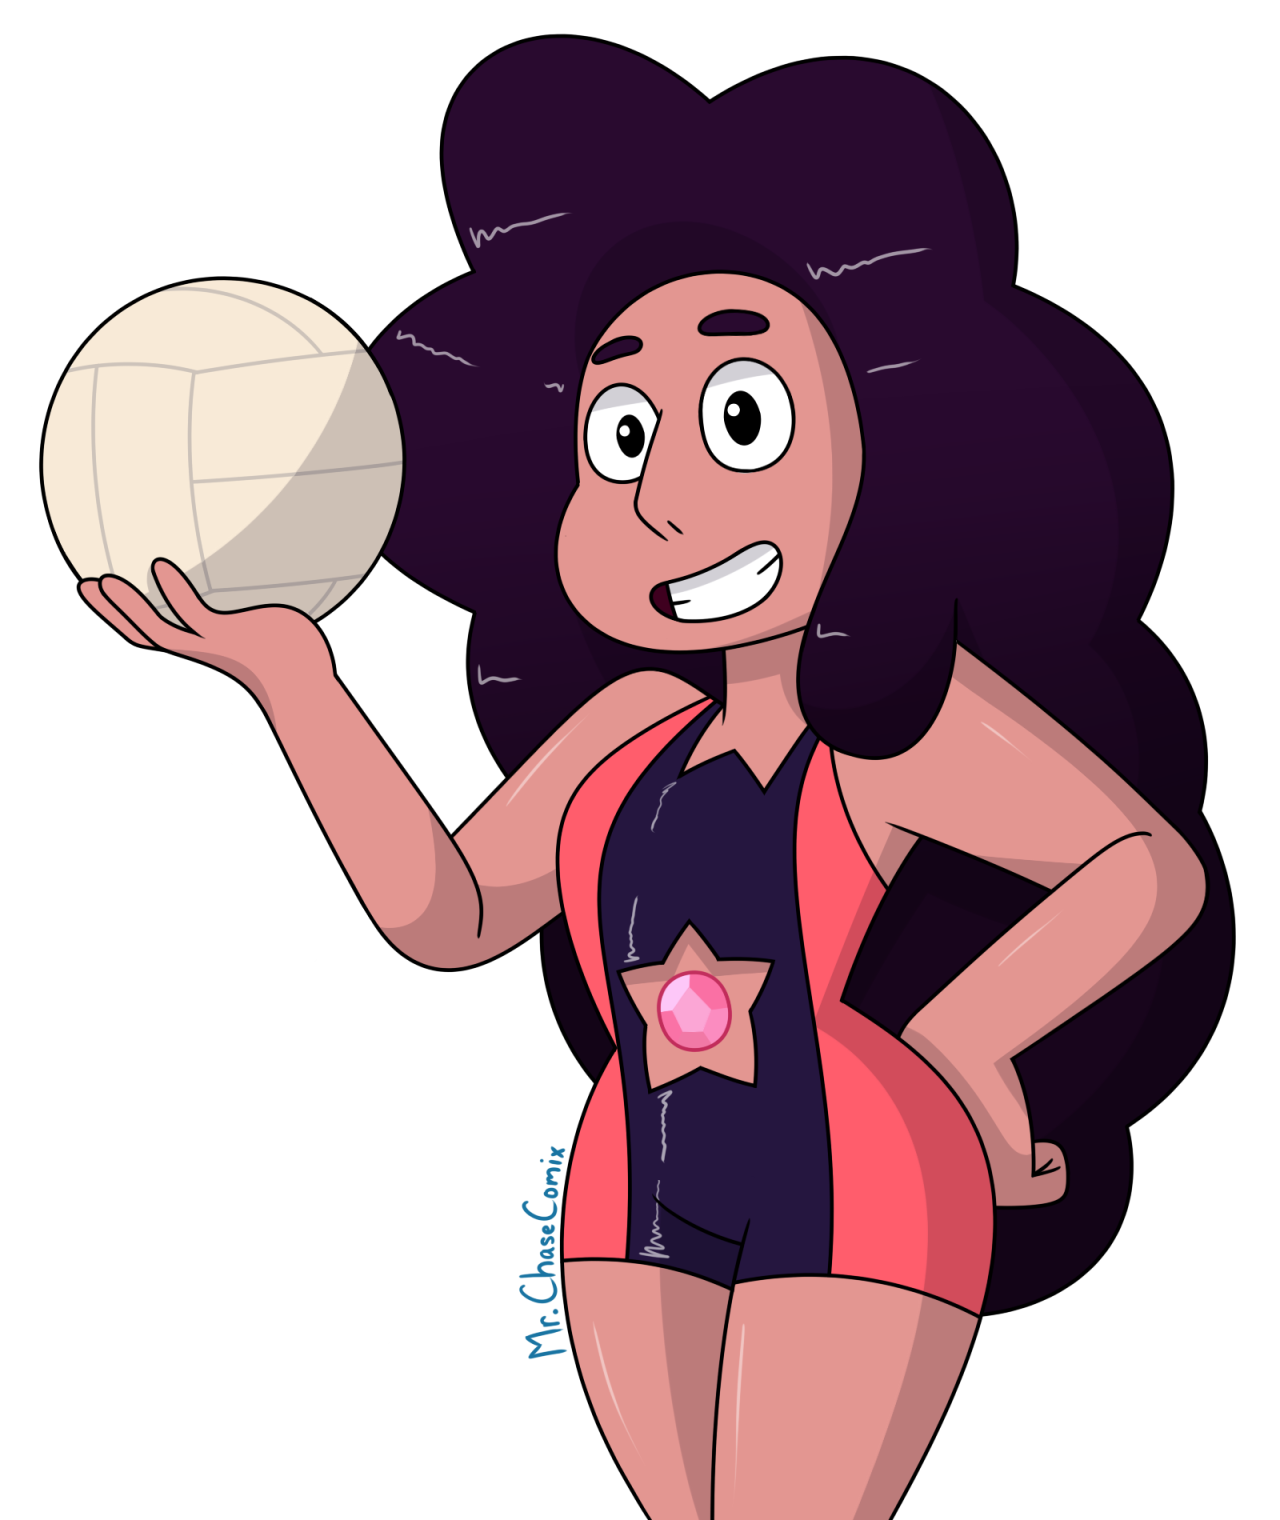 elolaresistente said: Request stevonnie summer ? Answer: Apologies for the late reply. I wanted to get a little creative with this one.